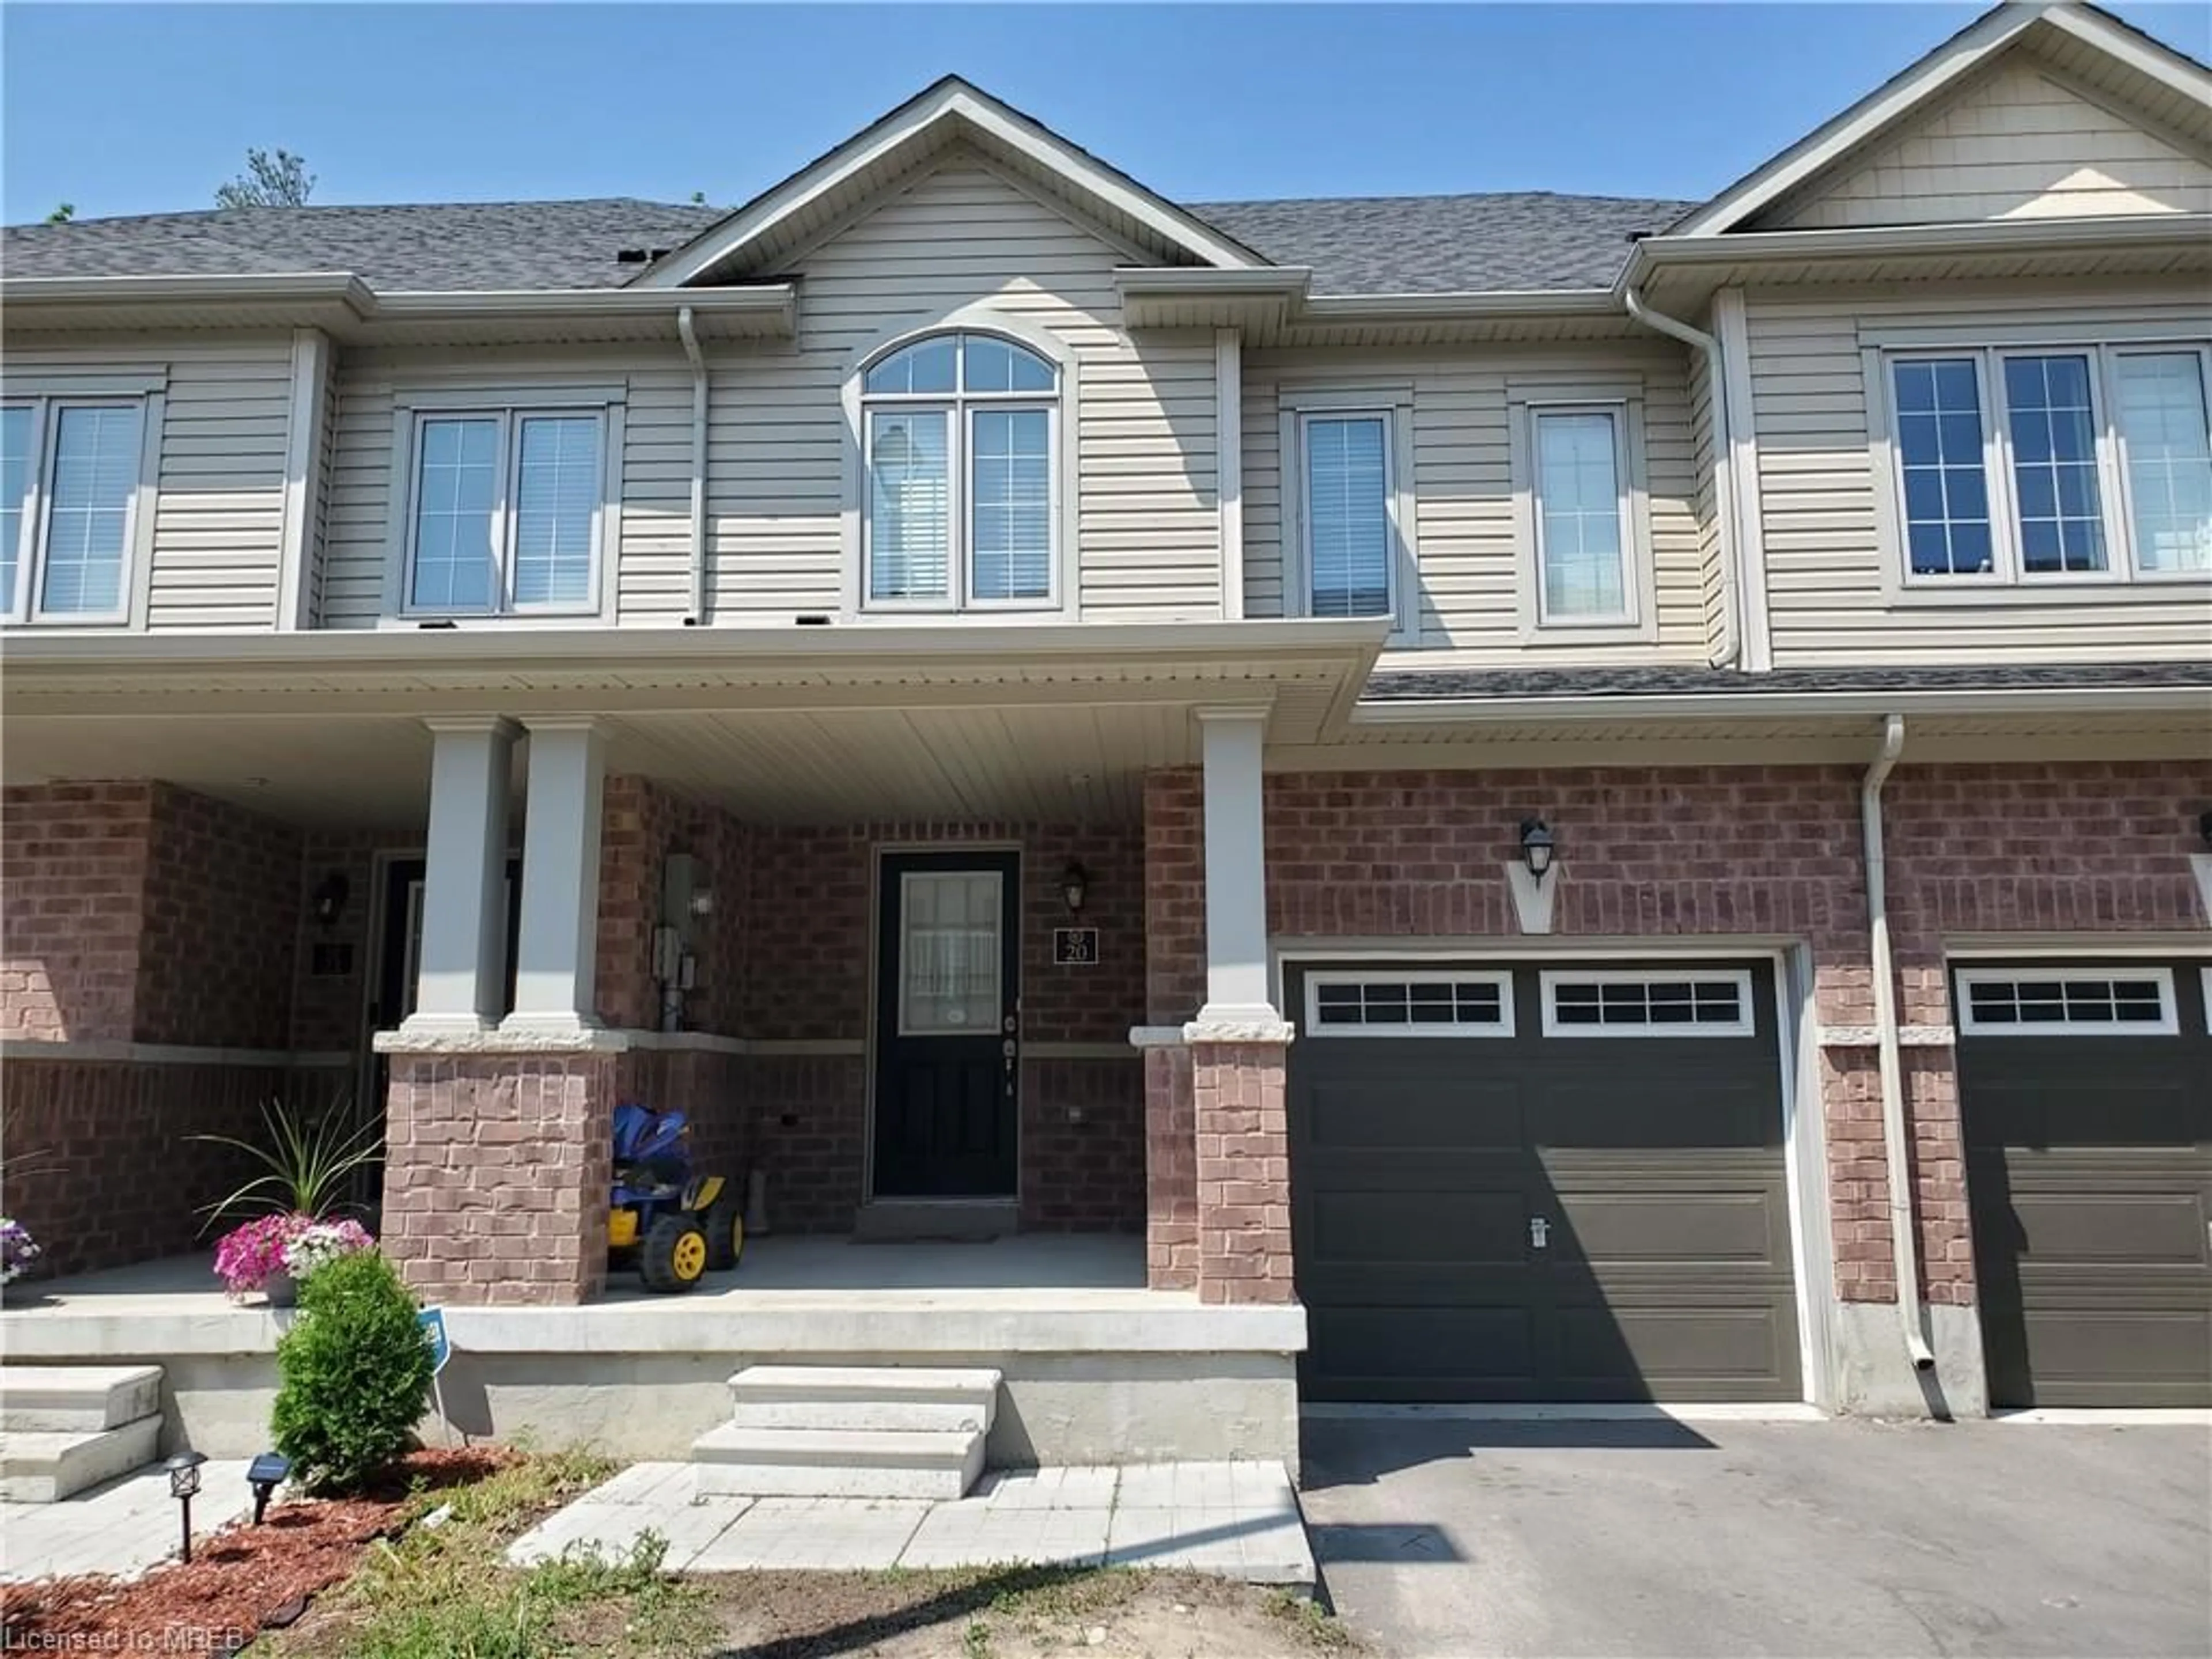 Home with brick exterior material for 570 Linden Dr #20, Cambridge Ontario N3H 0C9